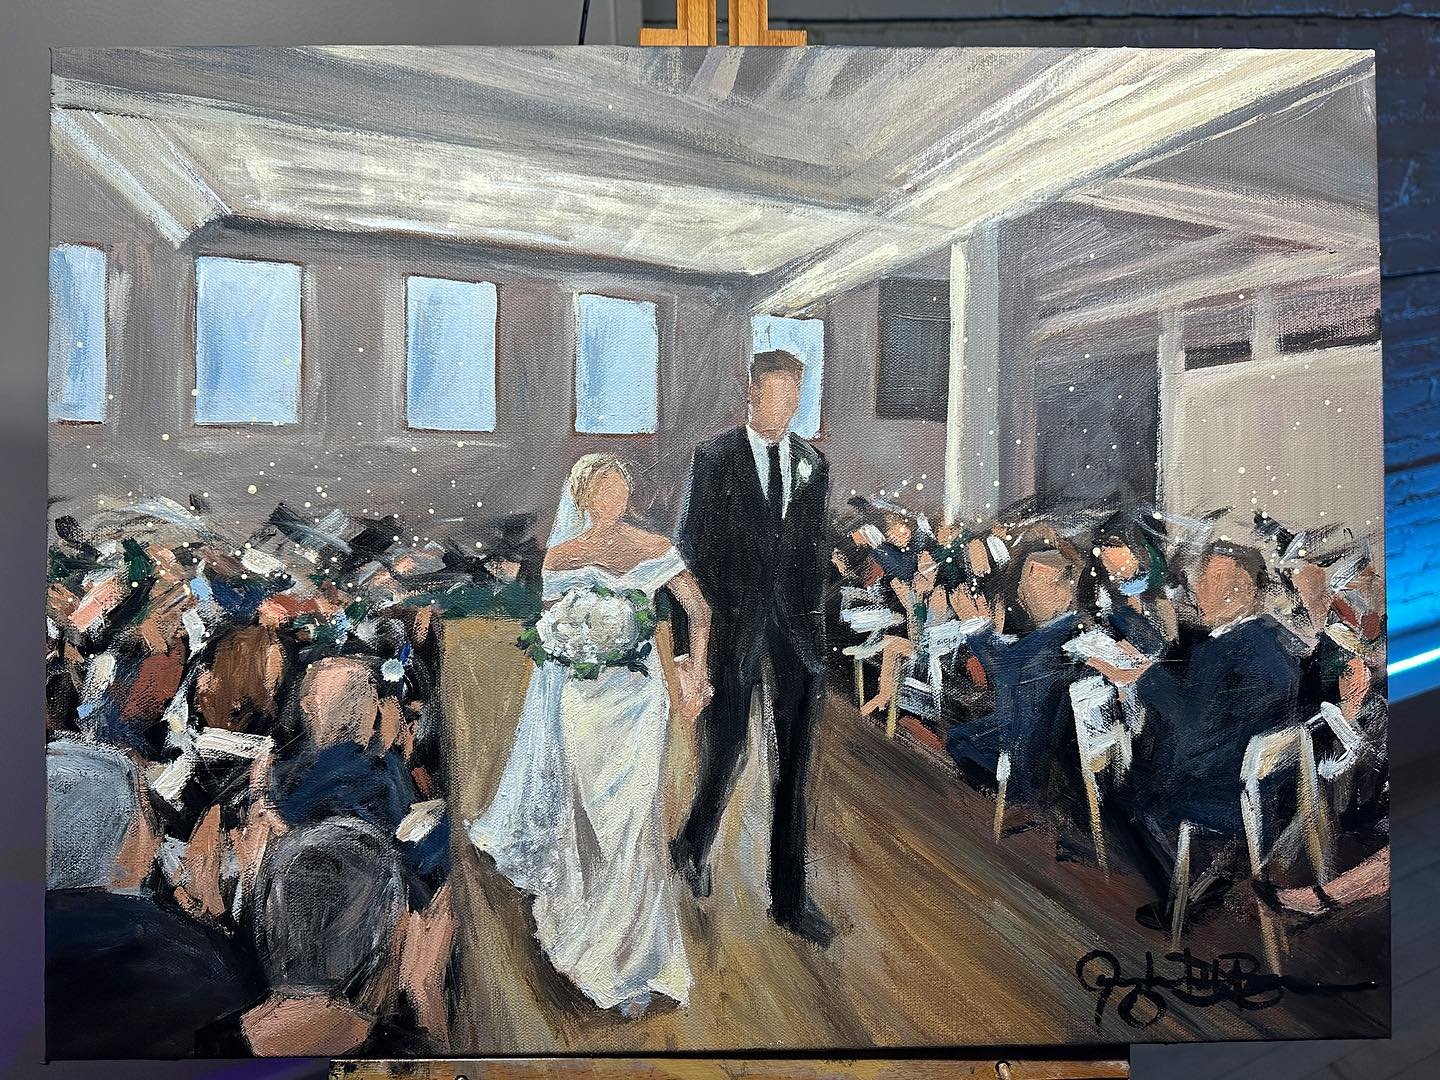 Madeline &amp; Brian&rsquo;s live wedding painting from their most charming and blissful ceremony on Saturday at Gordon Green! 🎨😄🤍✨ This 18x24in painting was finished on site, and what a night it was! Thanks to the happy couple for having me there